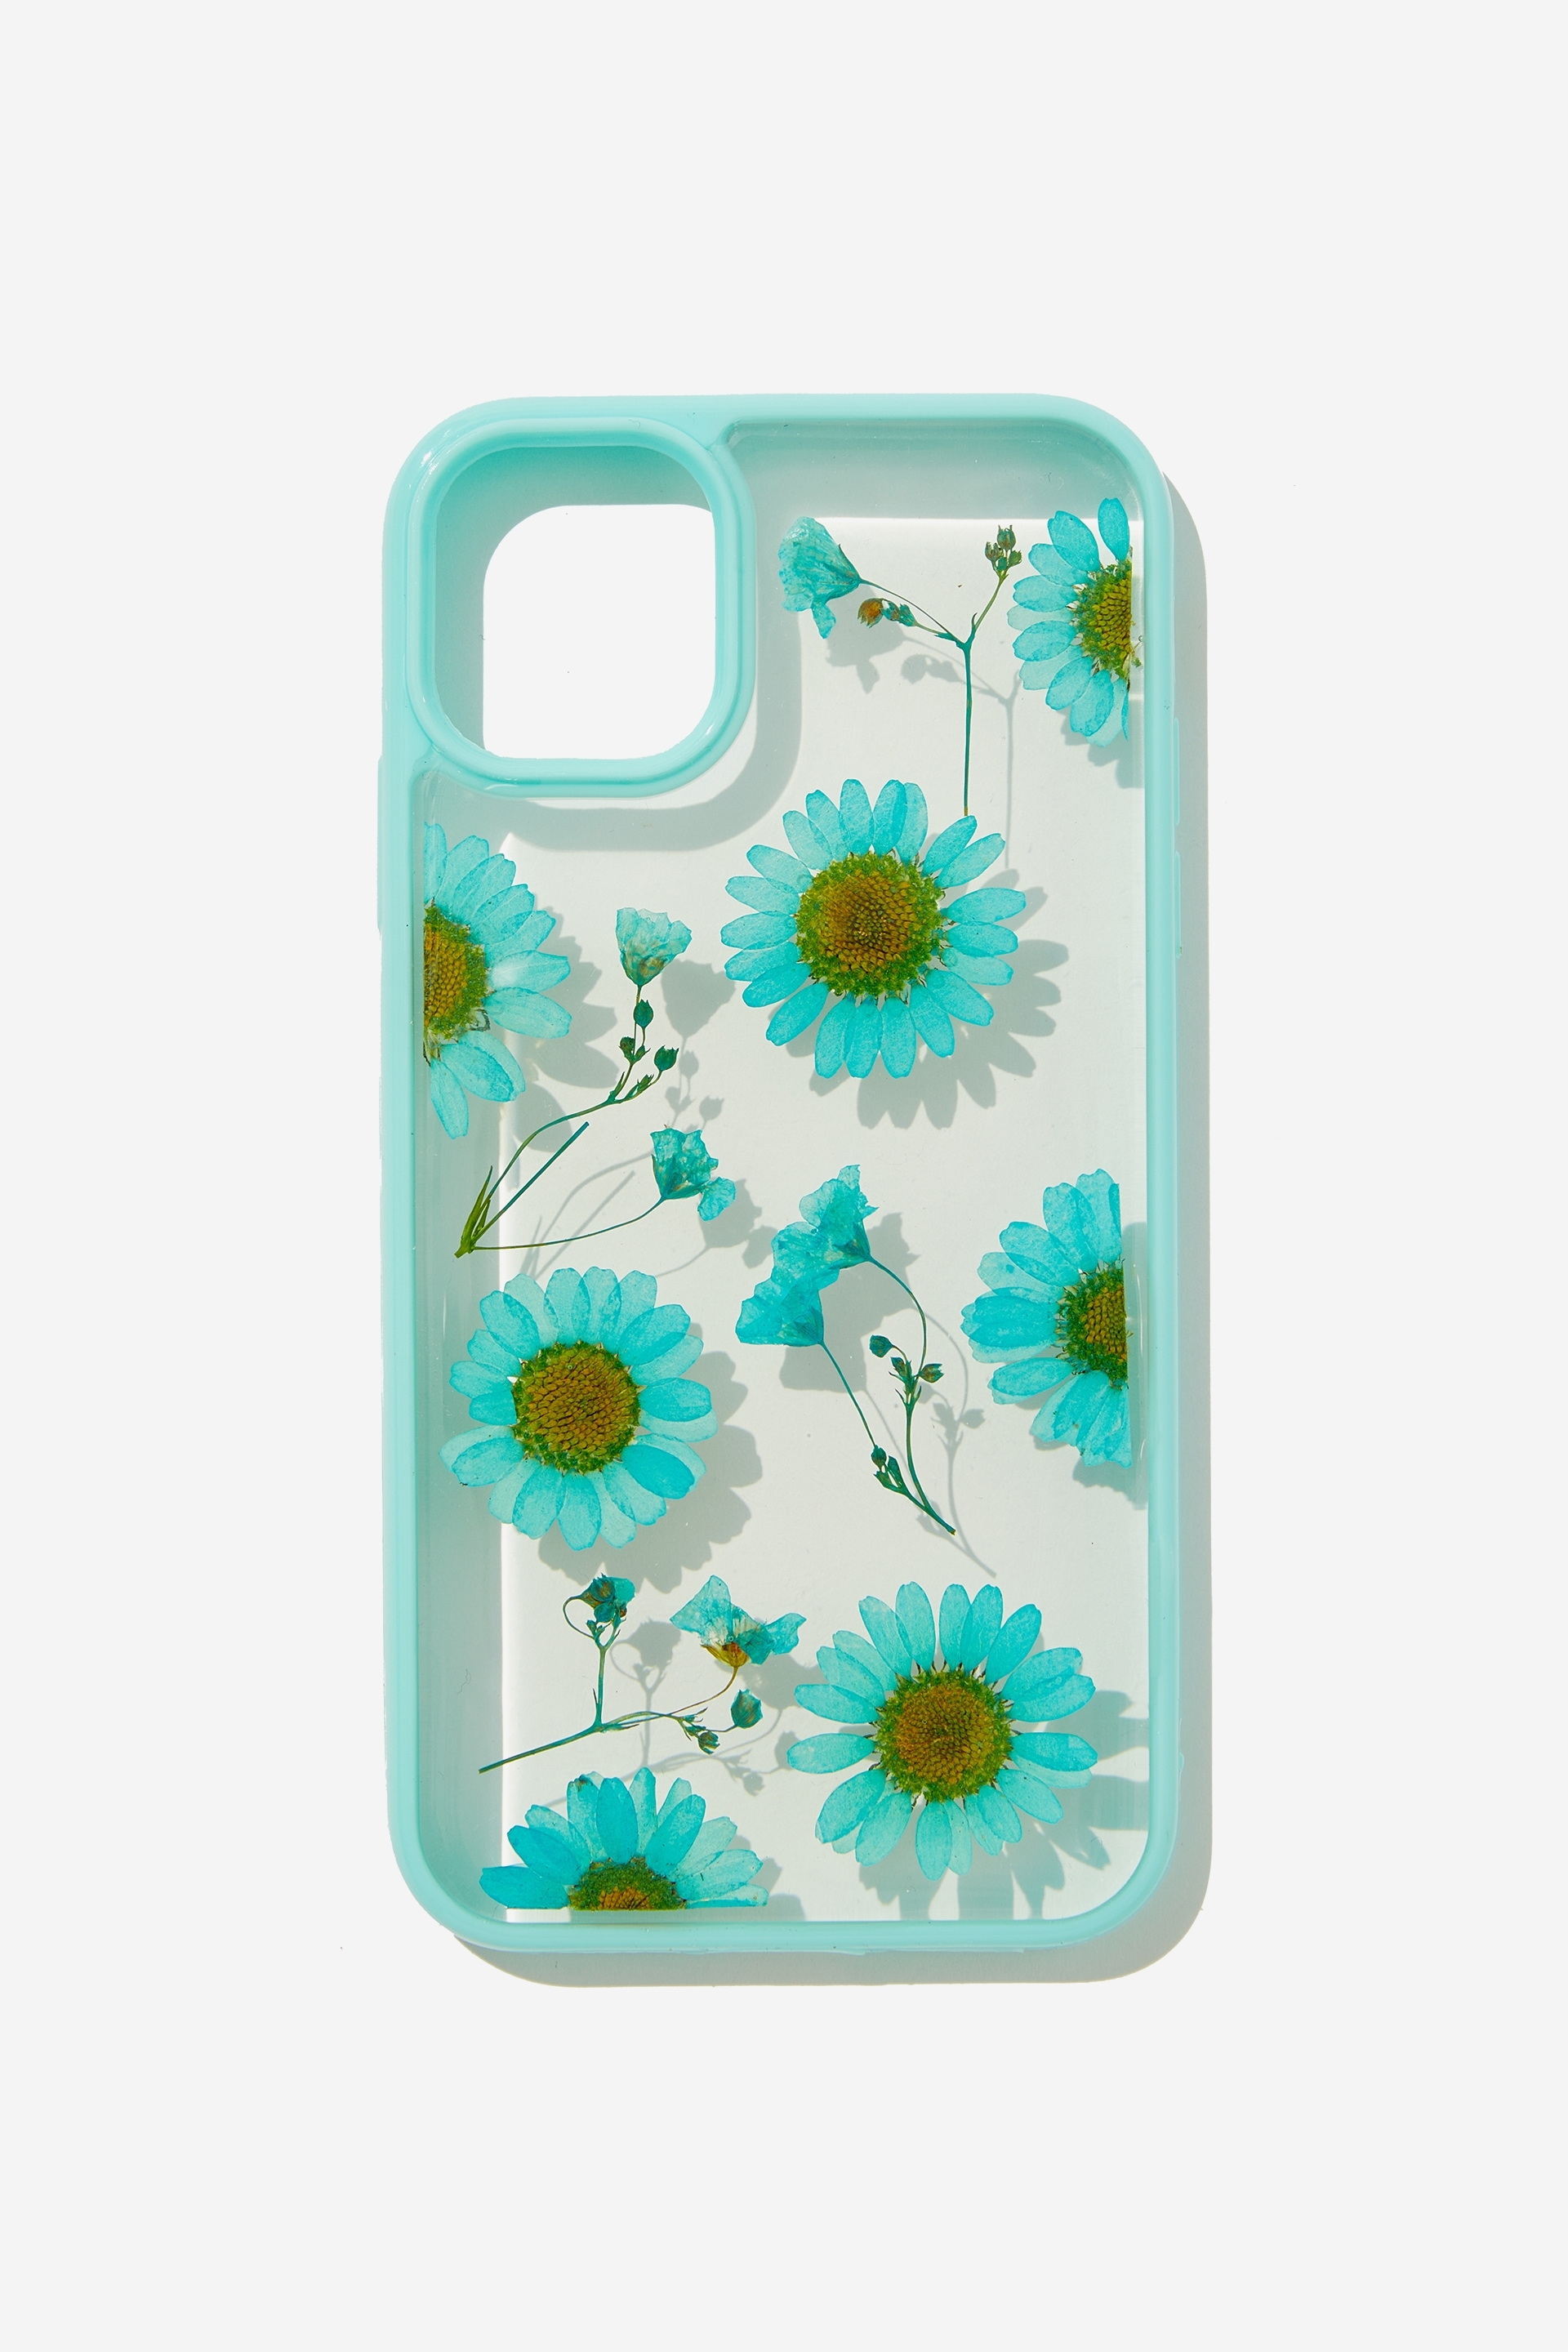 Typo - Protective Phone Case iPhone 11 - Trapped blue daisy / blue